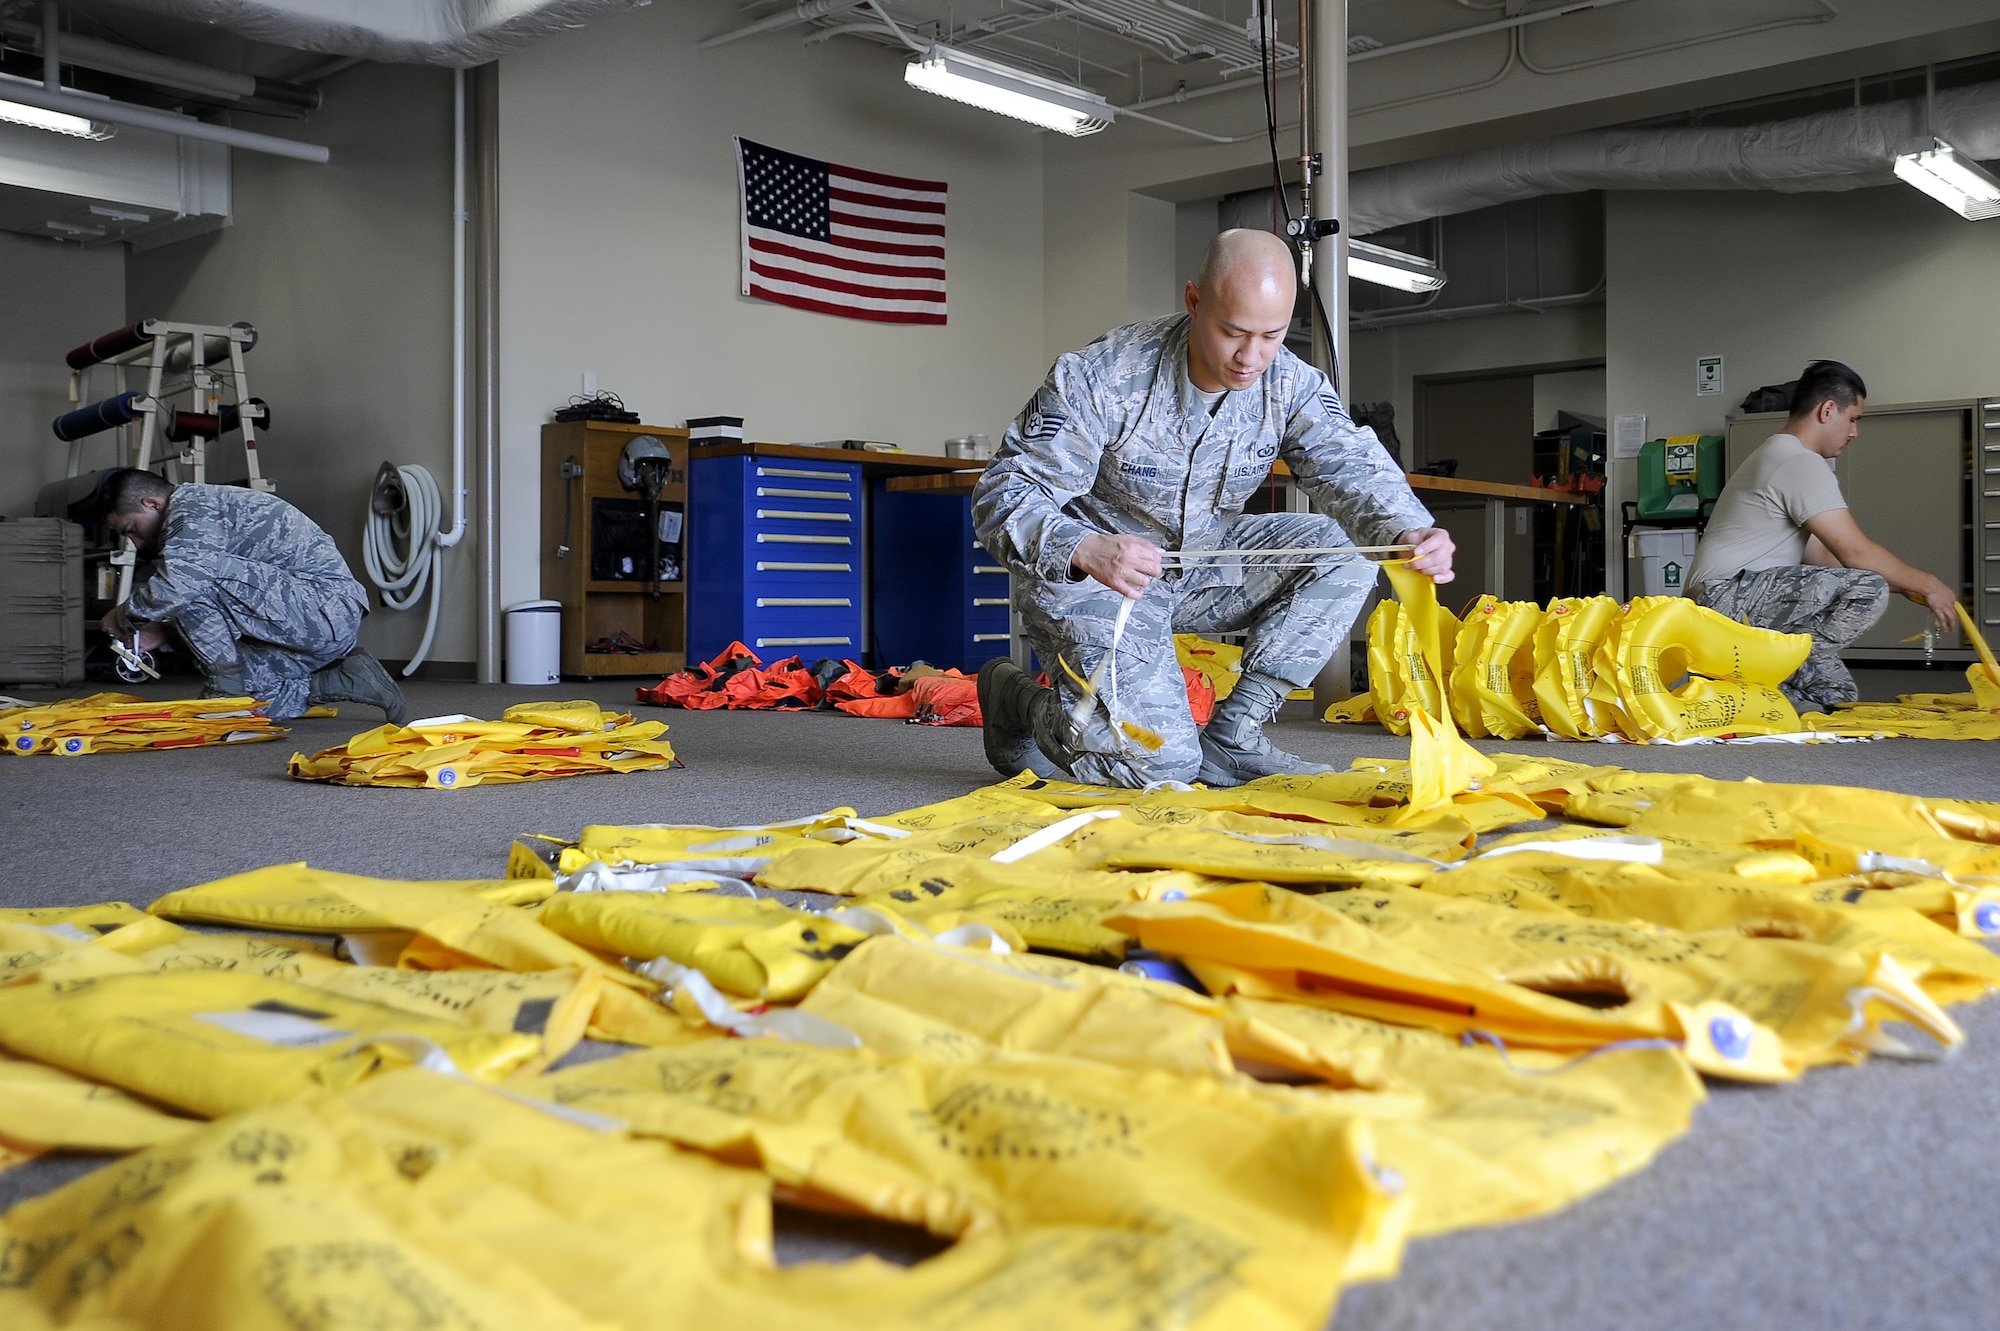 Tech. Sgt. Steven Gomez, left, Staff Sgt. Leader Chang, center, and Airman 1st Class Ysaak Hemenway, right, aircrew flight equipment (AFE) technicians with the 6th Operations Support Squadron, inspect aircraft life vests at MacDill Air Force Base, Fla., Nov. 2, 2016. Aircrew flight equipment Airmen inspect equipment based on inspection cycles, which requires certain items to be inspected periodically based on their technical orders. (U.S. Air Force photo by Airman 1st Class Mariette Adams)